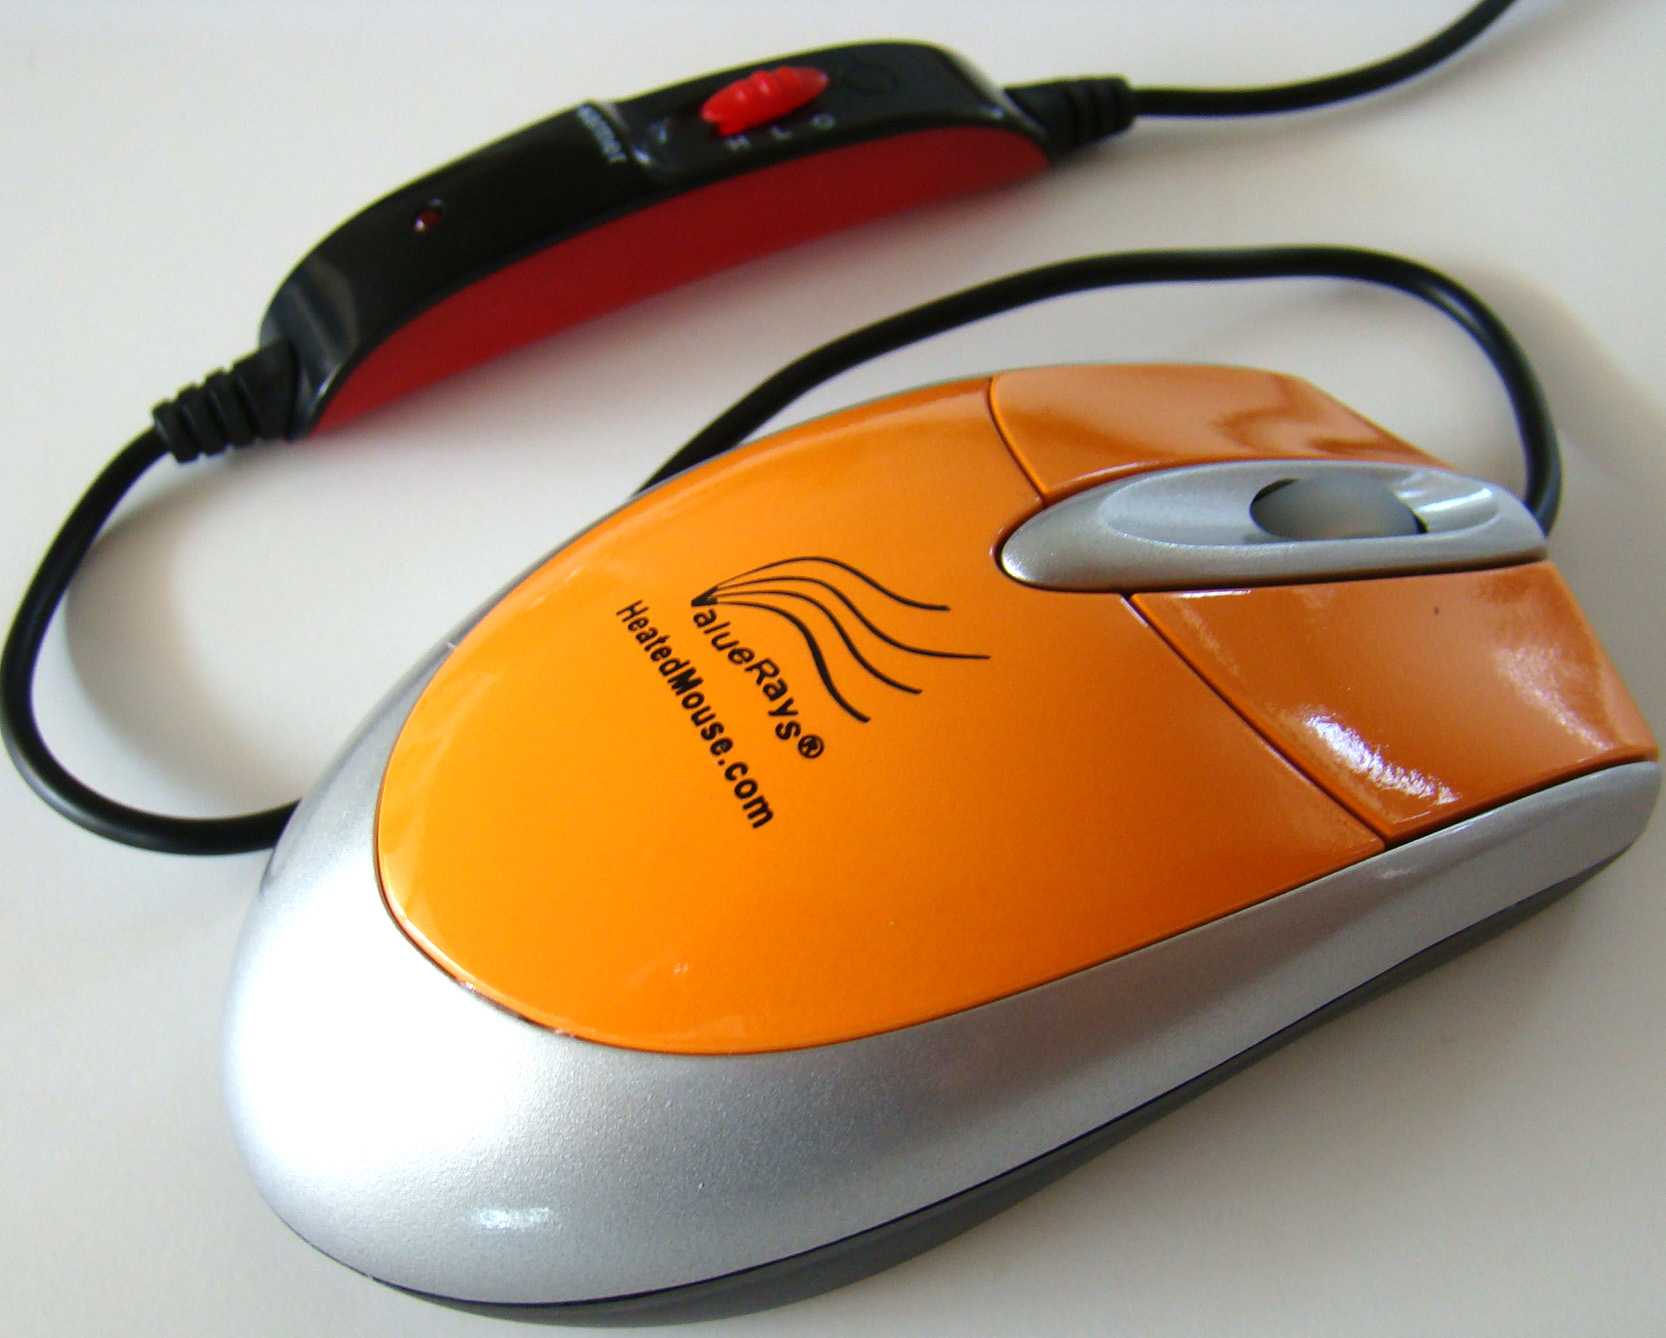 ValueRays® Executive Series Heated Mouse - The Orange Executive's Assistant Warm Mouse